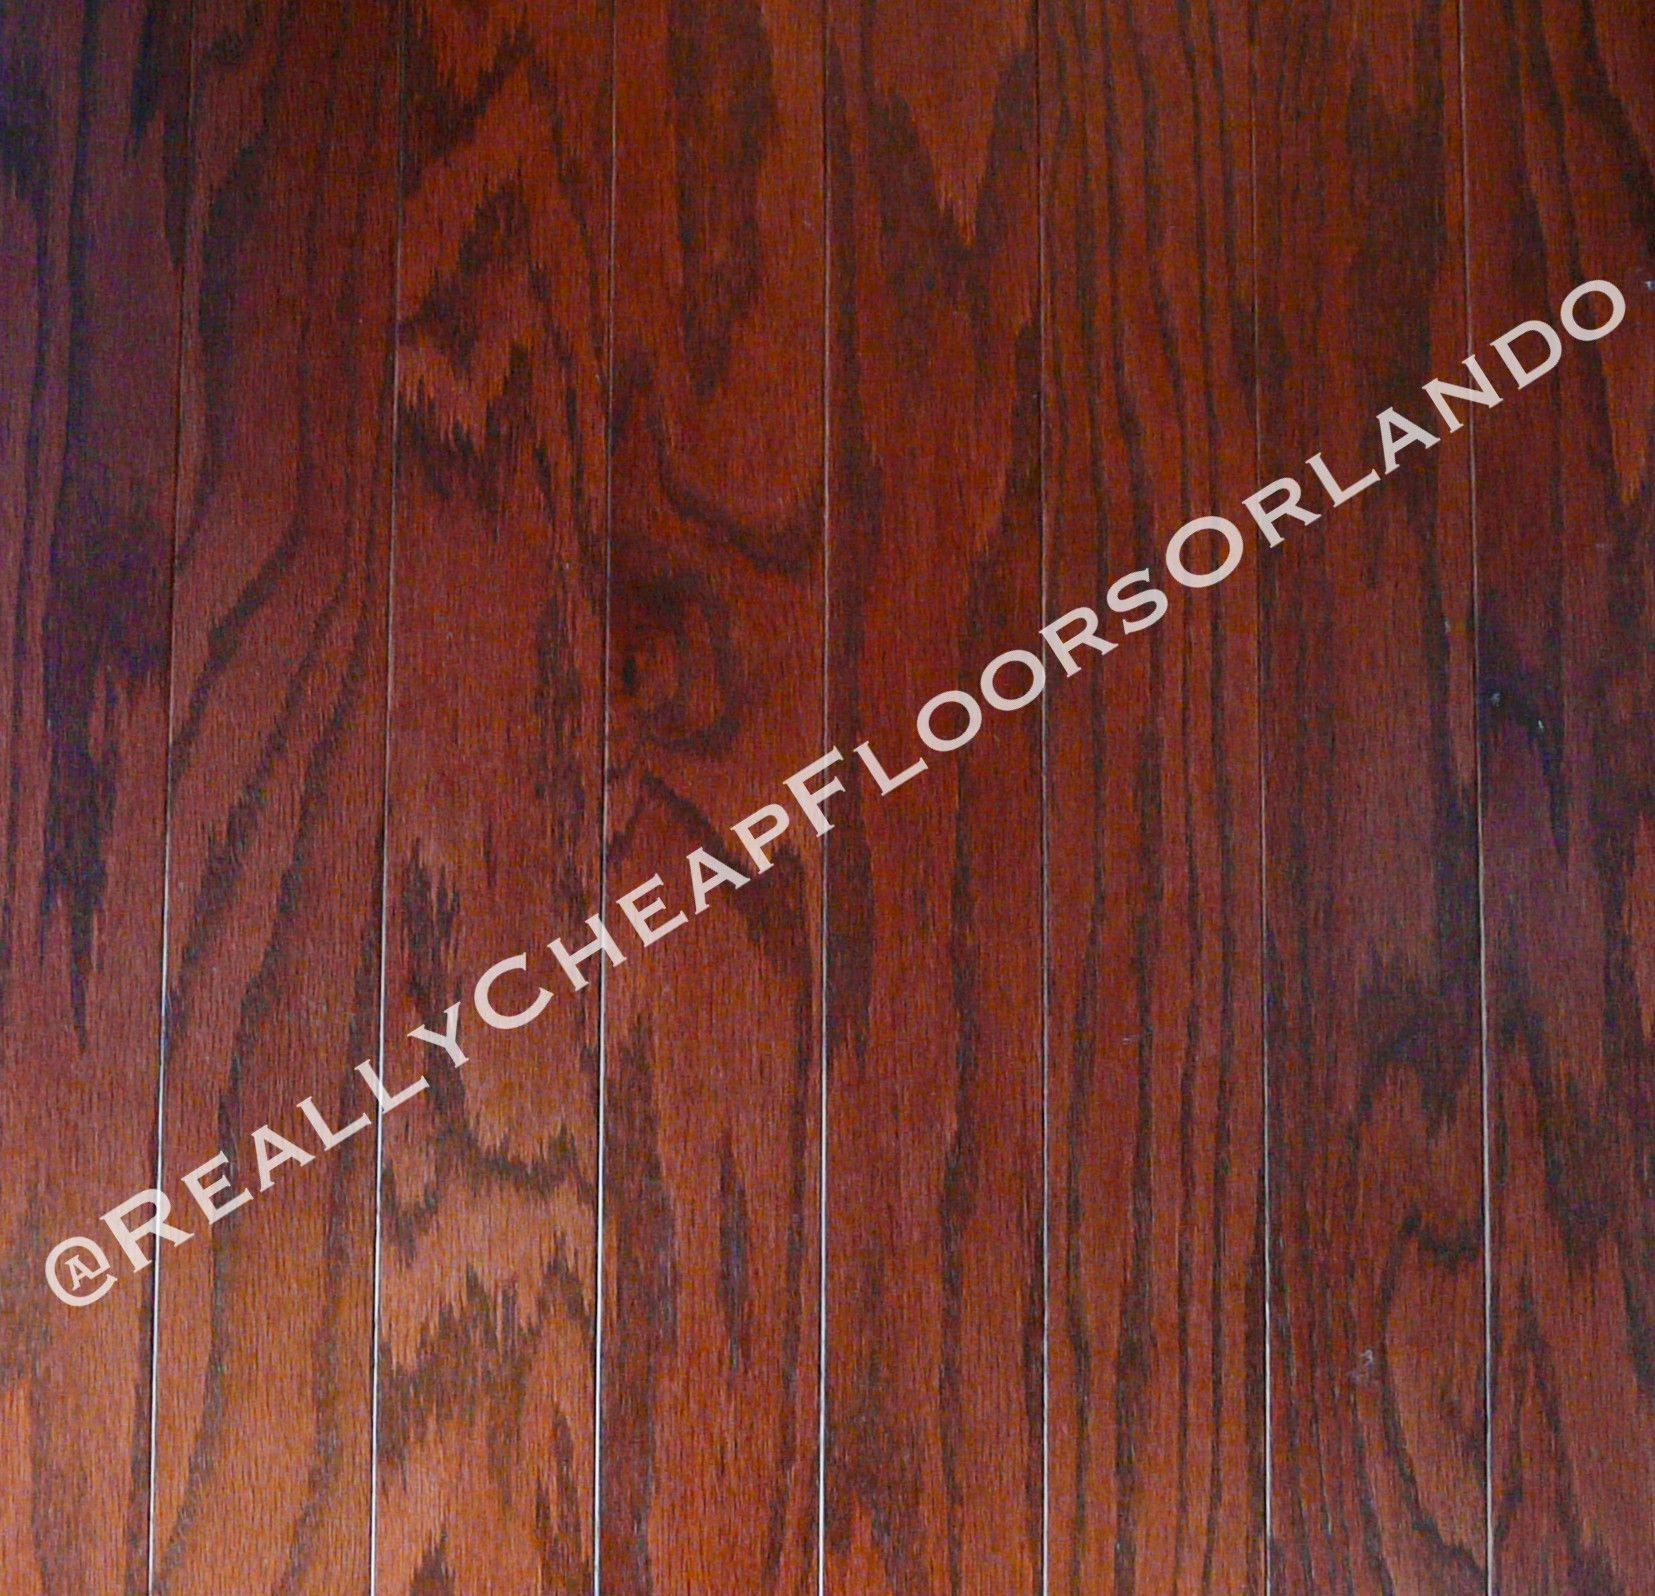 22 Lovely Hardwood Floor Options Home 2024 free download hardwood floor options home of 19 new cheapest hardwood flooring photograph dizpos com within cheapest hardwood flooring inspirational american made hardwood flooring at the cheapest prices 